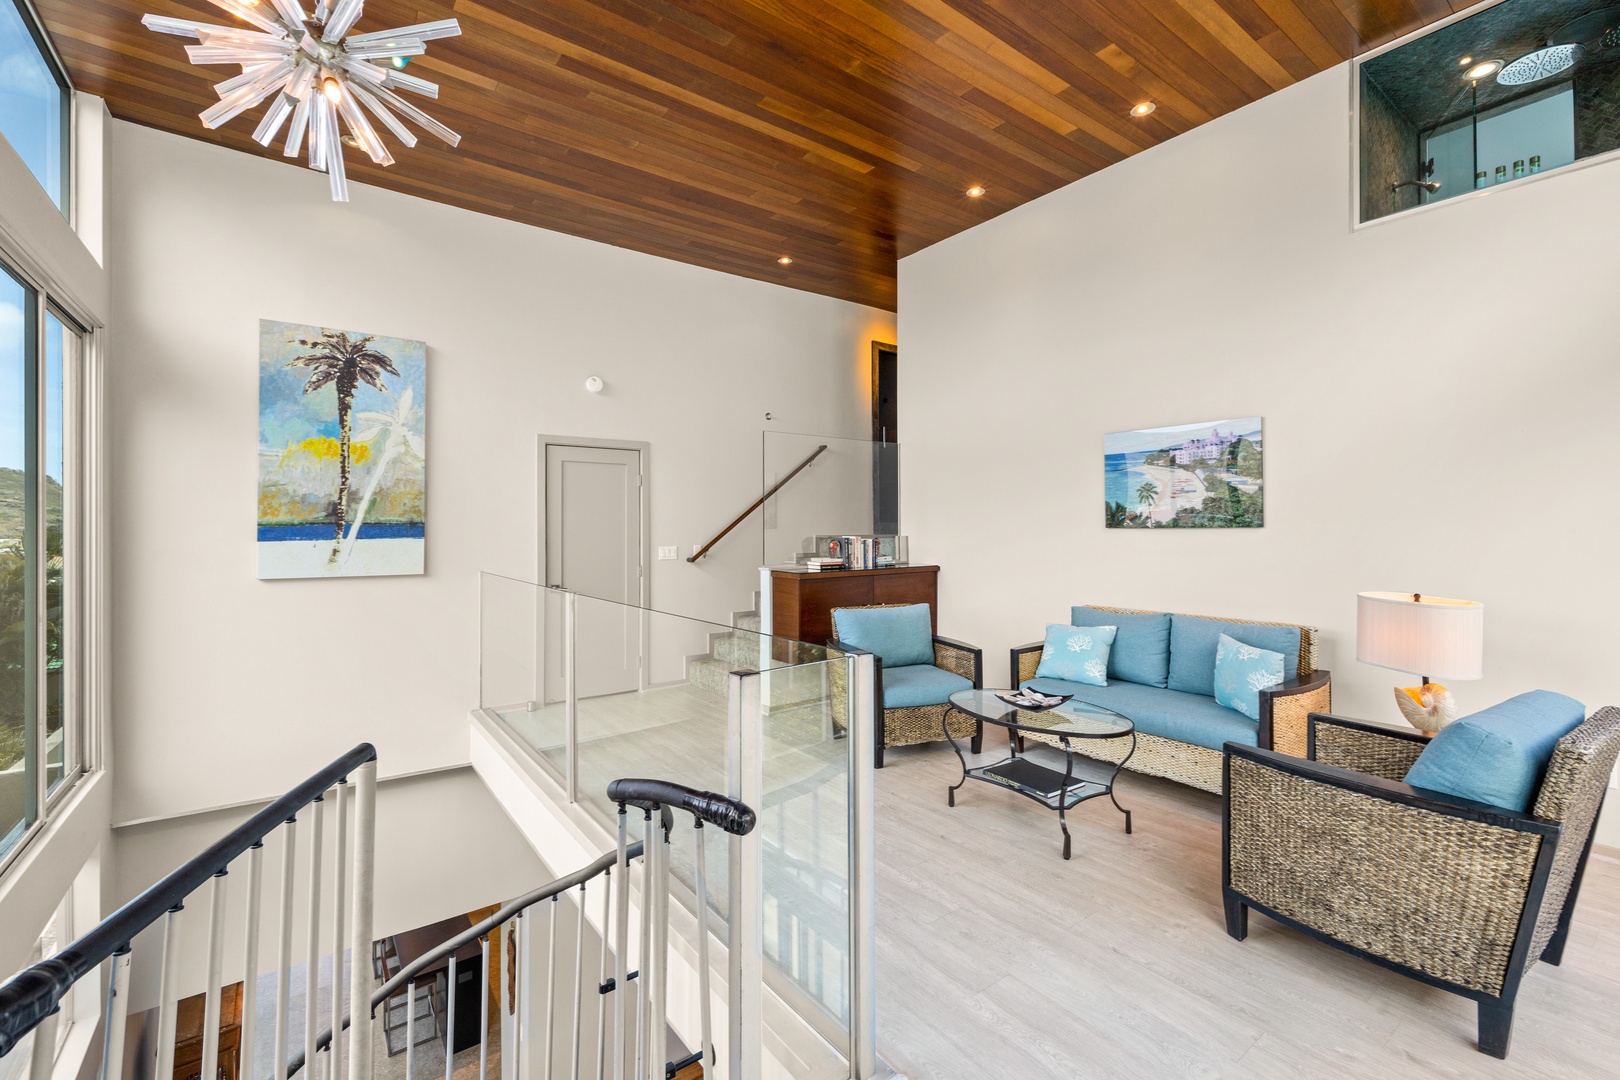 Honolulu Vacation Rentals, Villa Luana - Additional seating area at the top of the spiral stairs, opening to the pool.